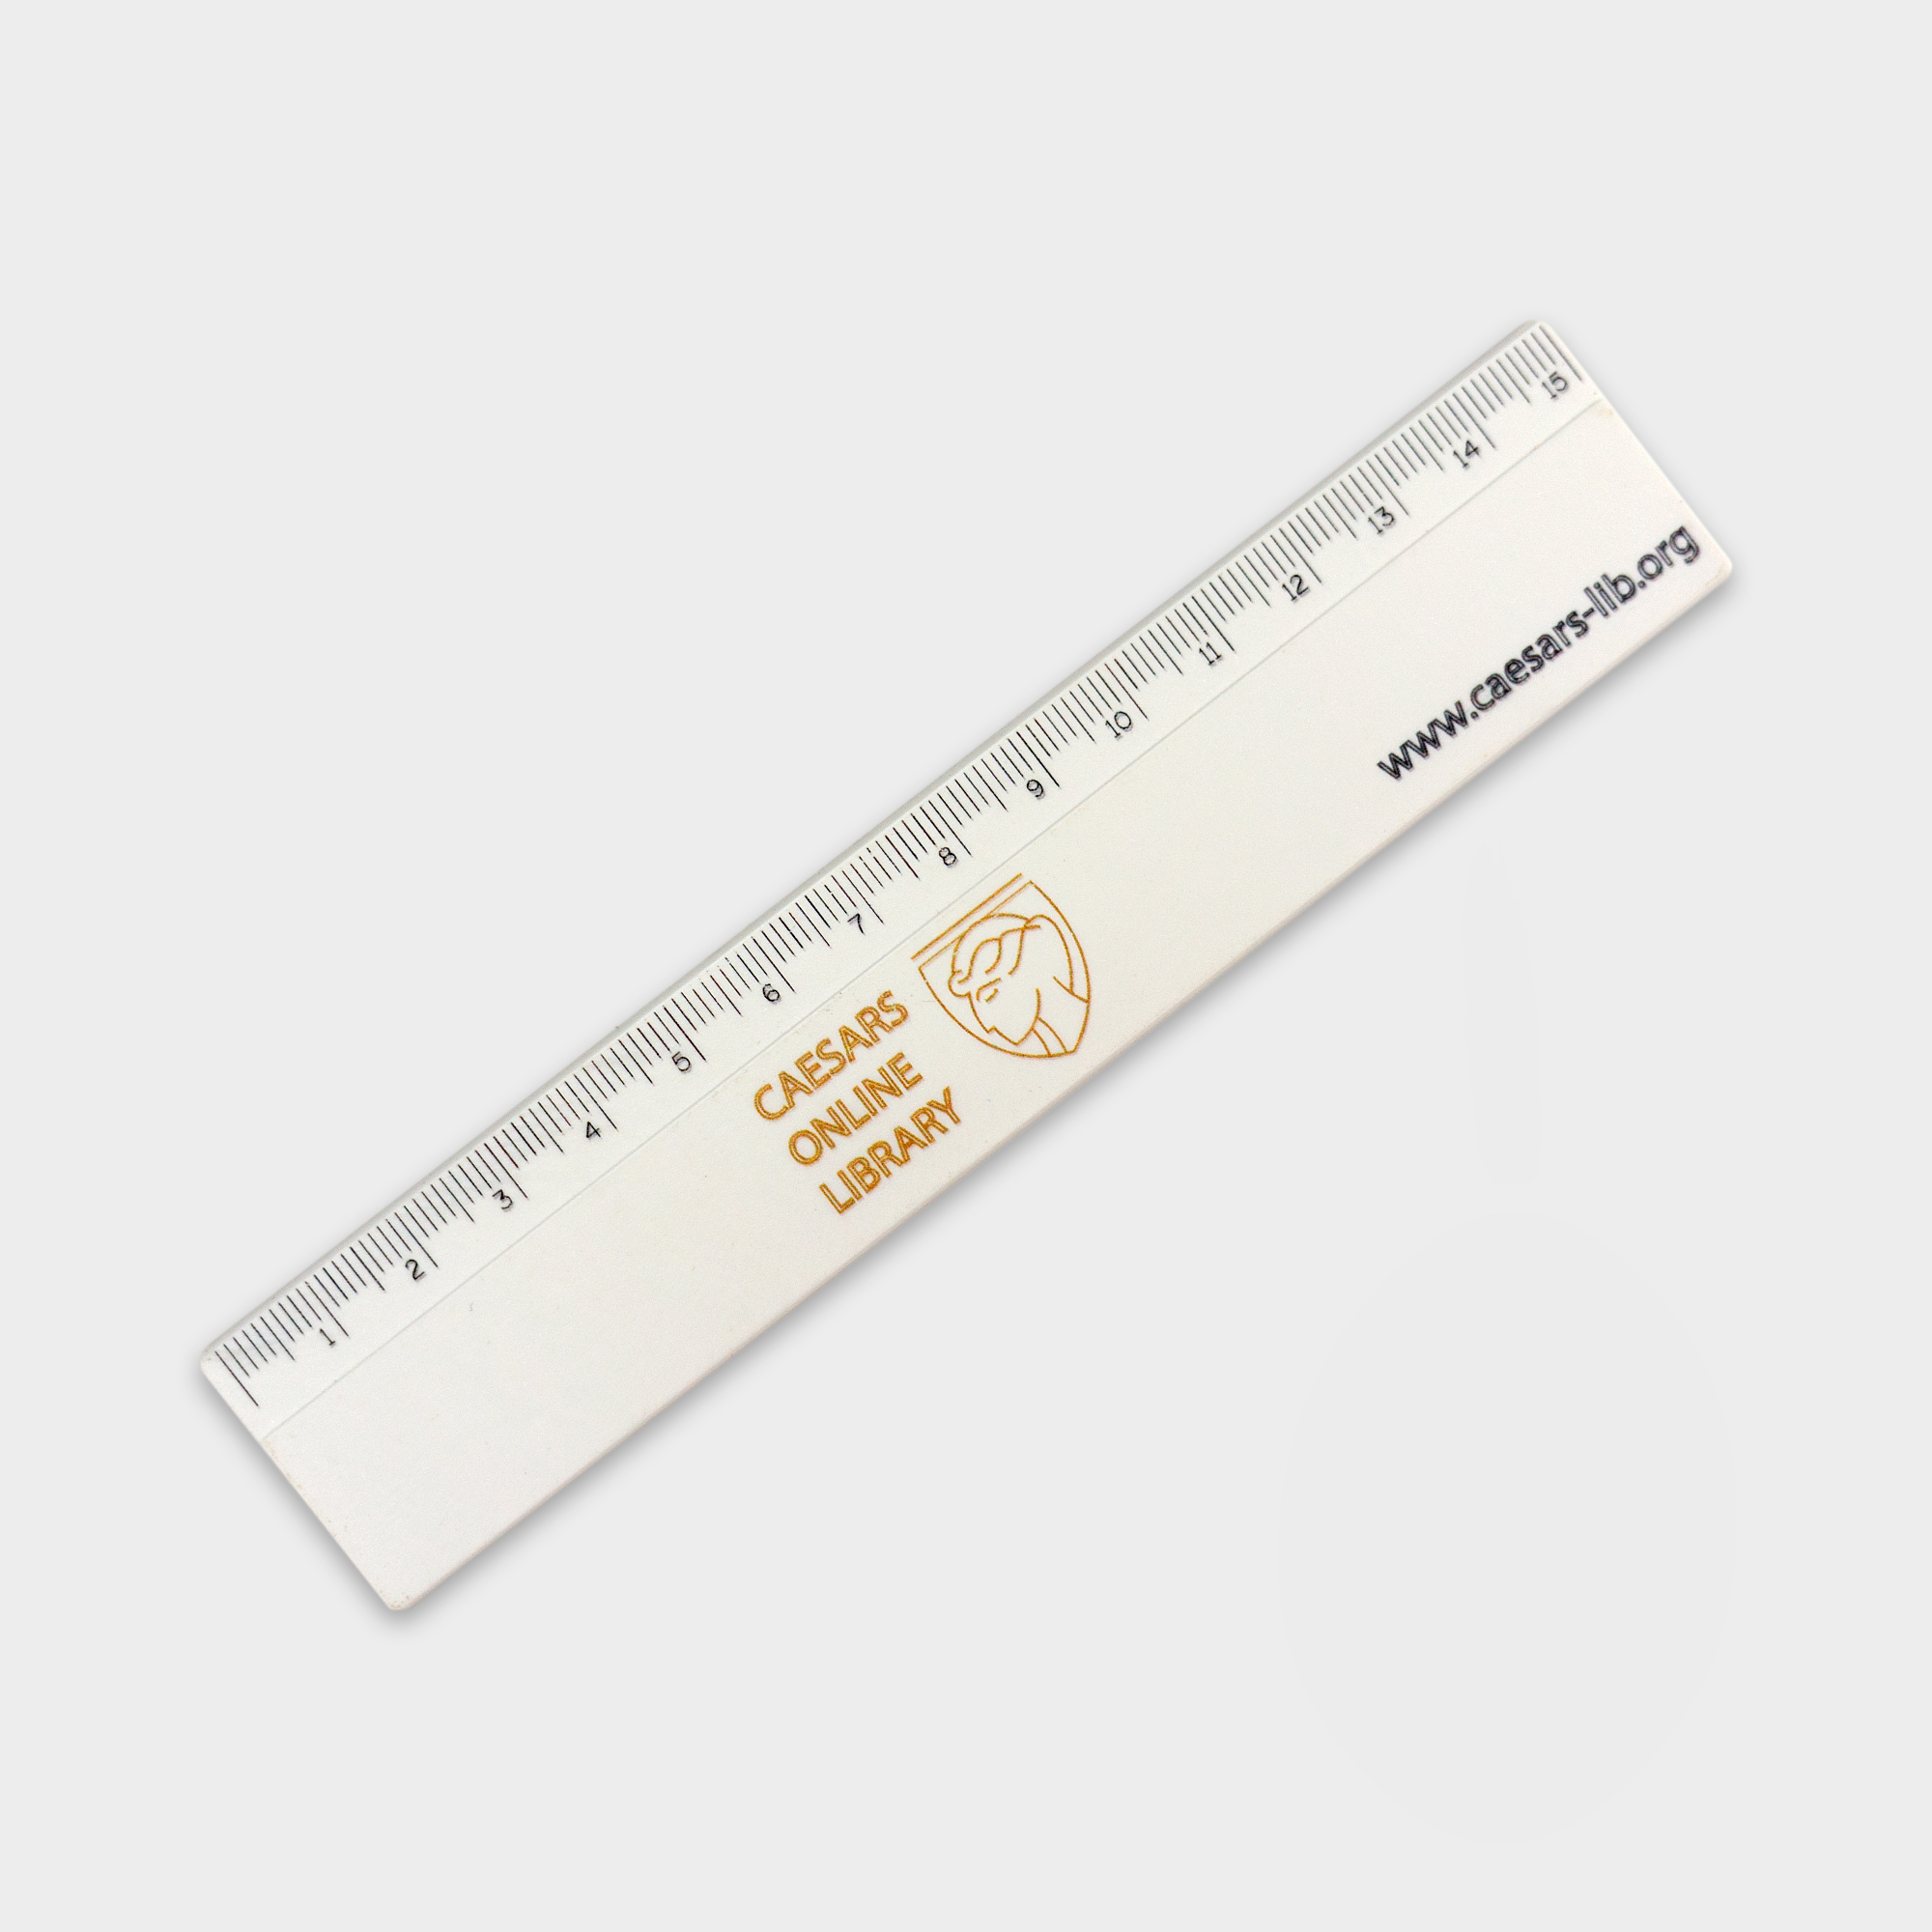 The Green & Good 15cm Digital Ruler is made from recycled plastic. Made in the UK, it is sturdy and durable. Available in white only with a digital print as standard. Graduations are pre-printed in black.